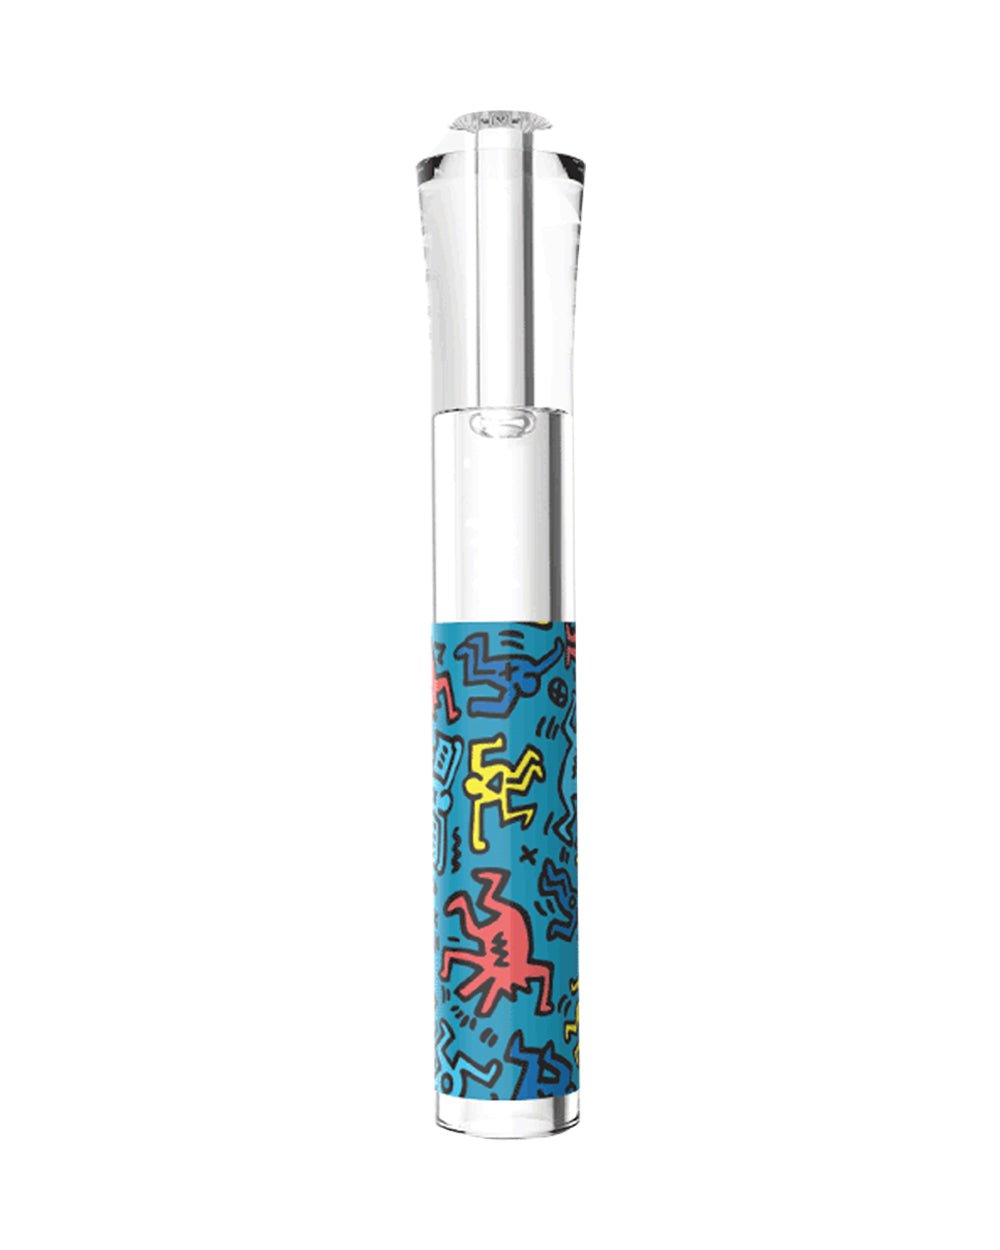 Keith Haring | Glass Taster Chillum Hand Pipe | 3in Long - Glass - Black & White - 10